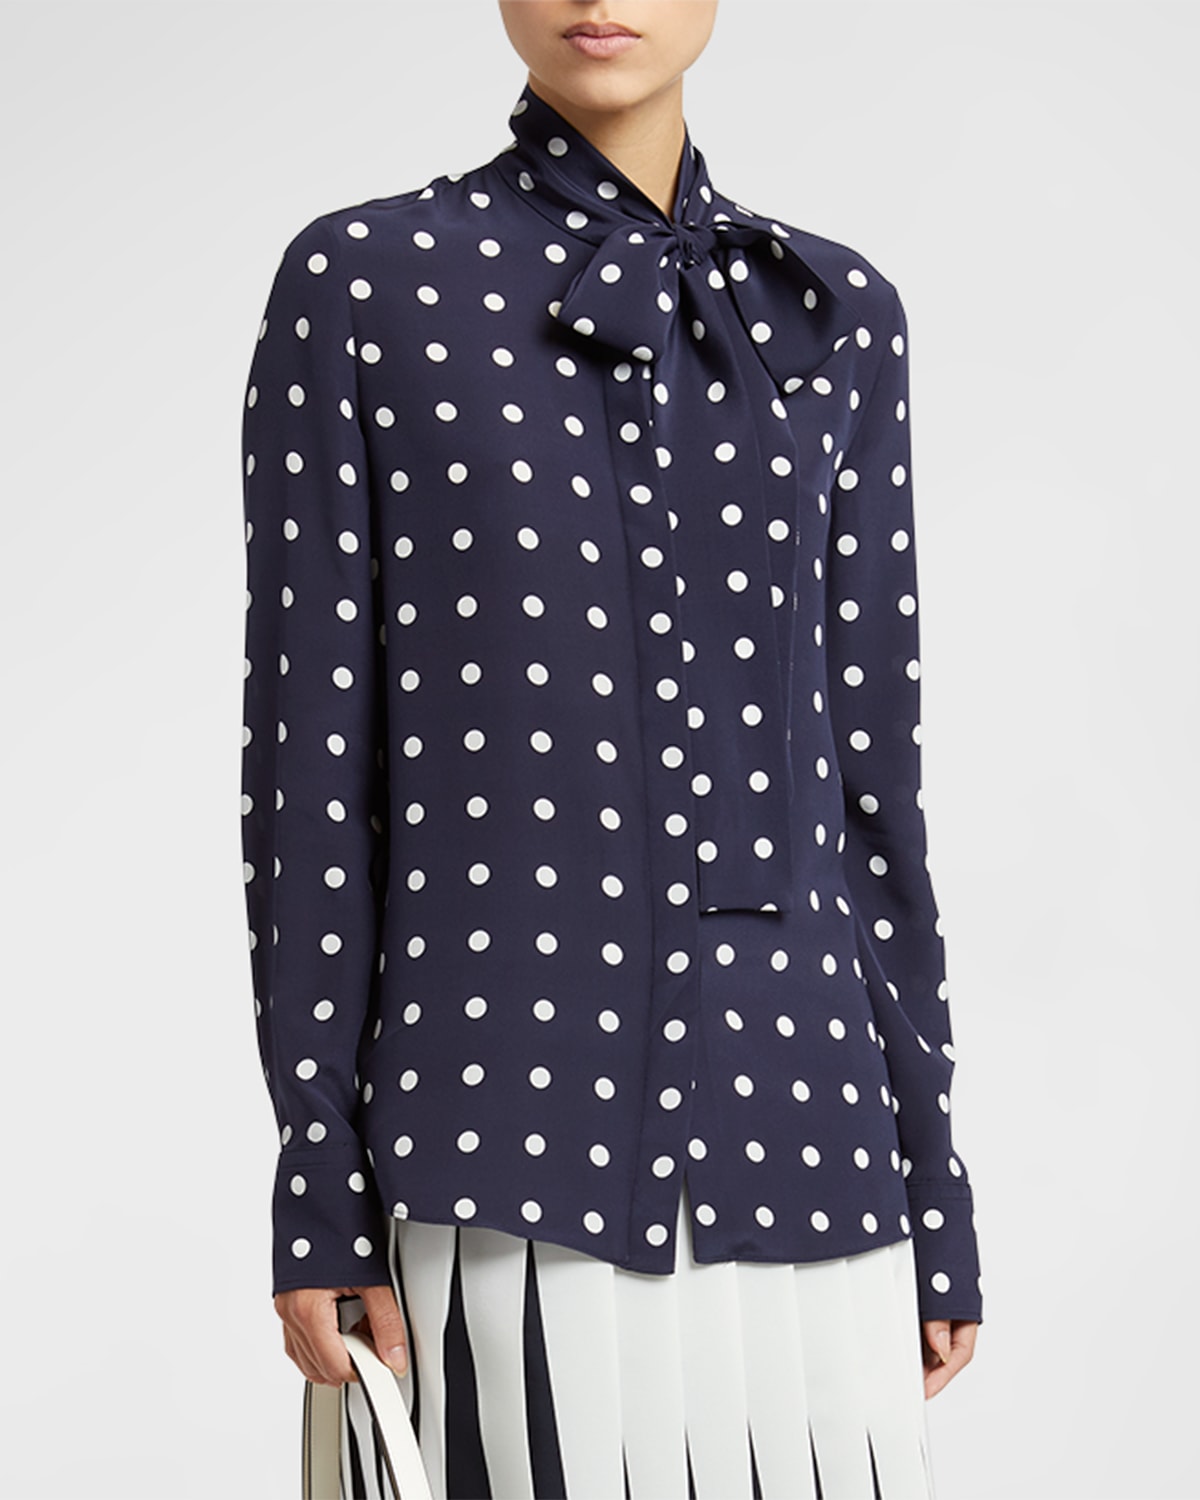 VALENTINO CREPE DE CHINE POLKA DOT BLOUSE WITH SCARF COLLAR